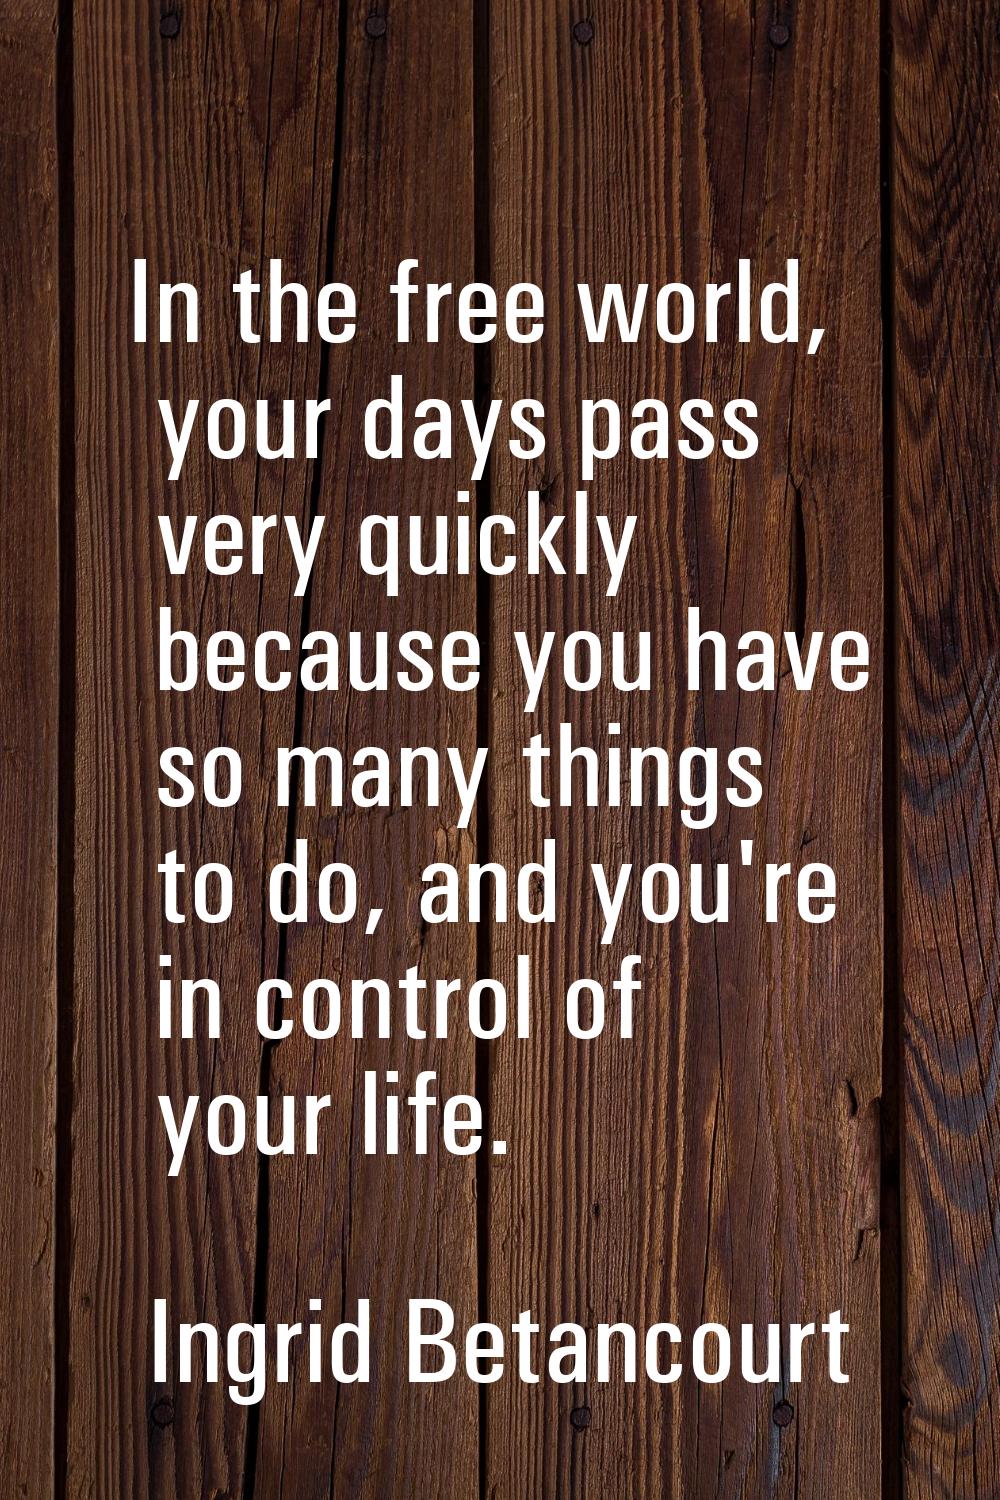 In the free world, your days pass very quickly because you have so many things to do, and you're in